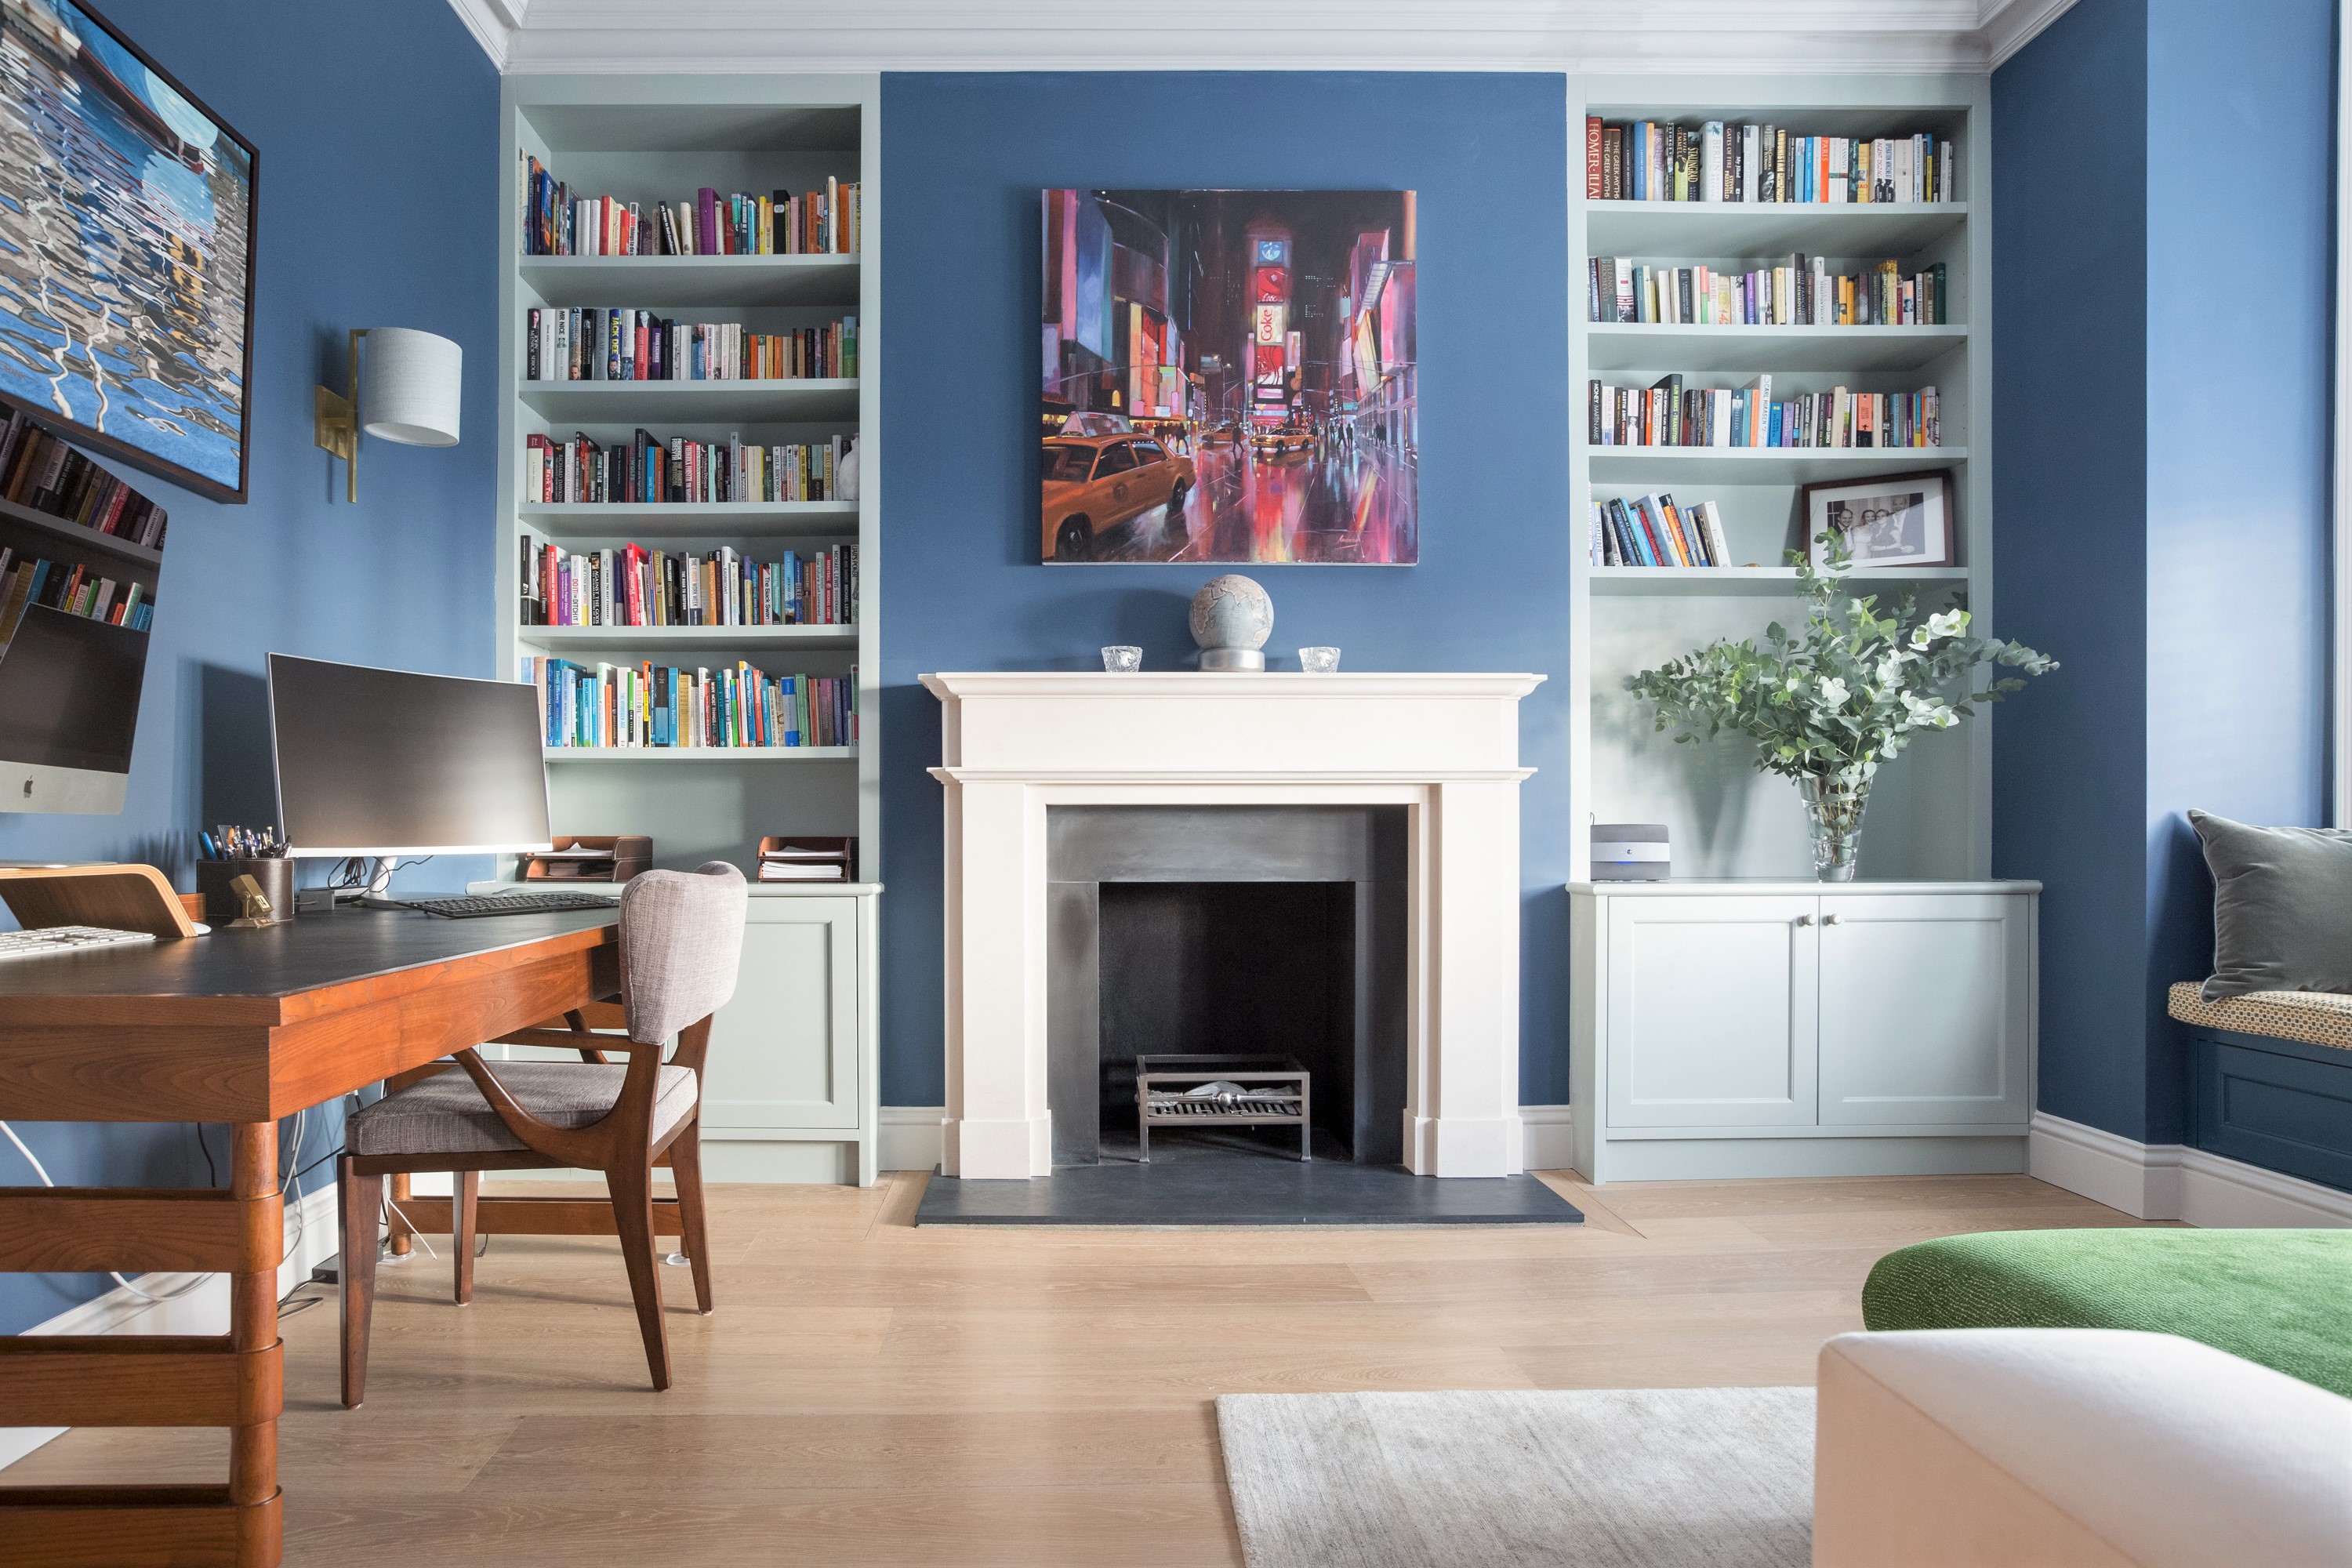 Blues and Greens mix in the home office. Bespoke joinery bookshelves flank the fireplace and set the stage for the Mid-Century Modern artwork and furniture